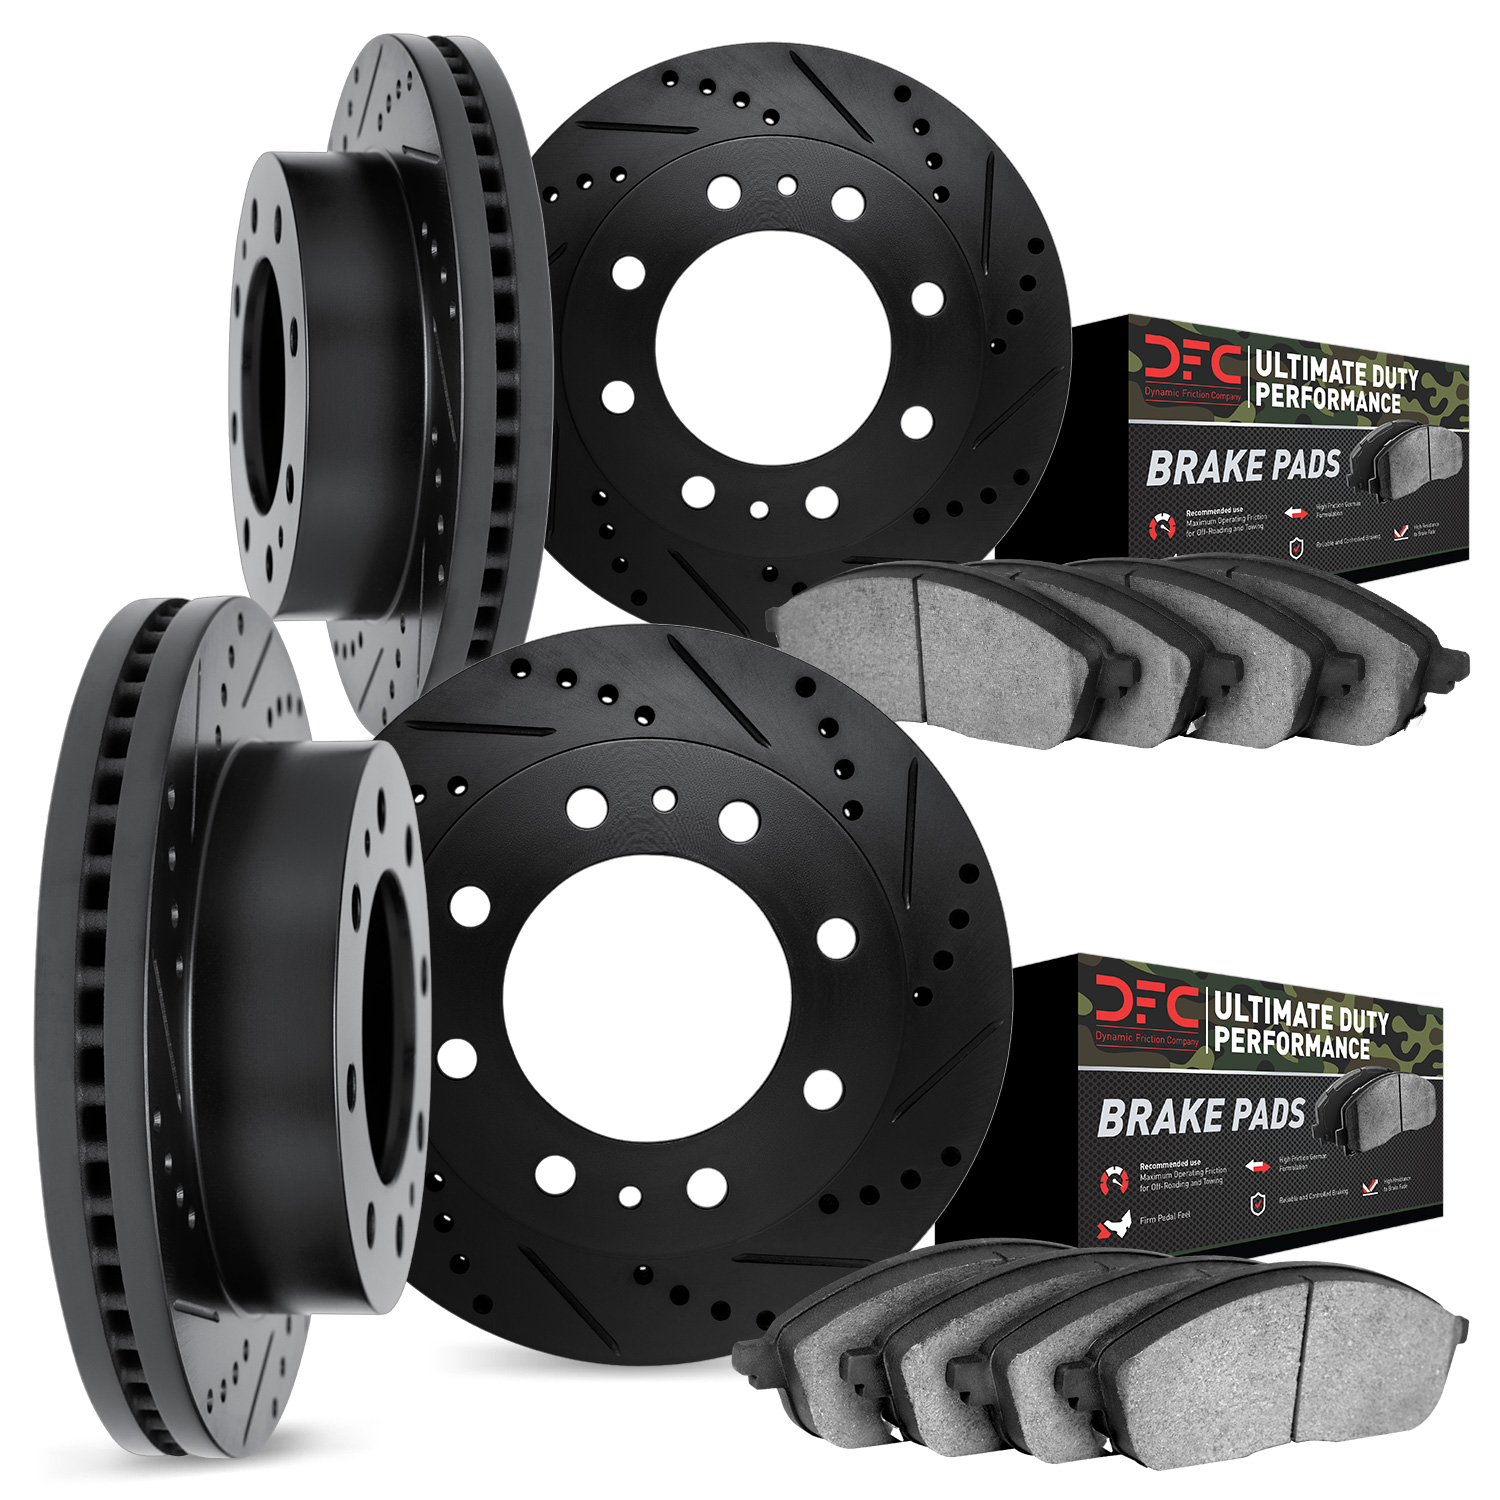 8404-46001 Drilled/Slotted Brake Rotors with Ultimate-Duty Brake Pads Kit [Black], 2006-2011 GM, Position: Front and Rear